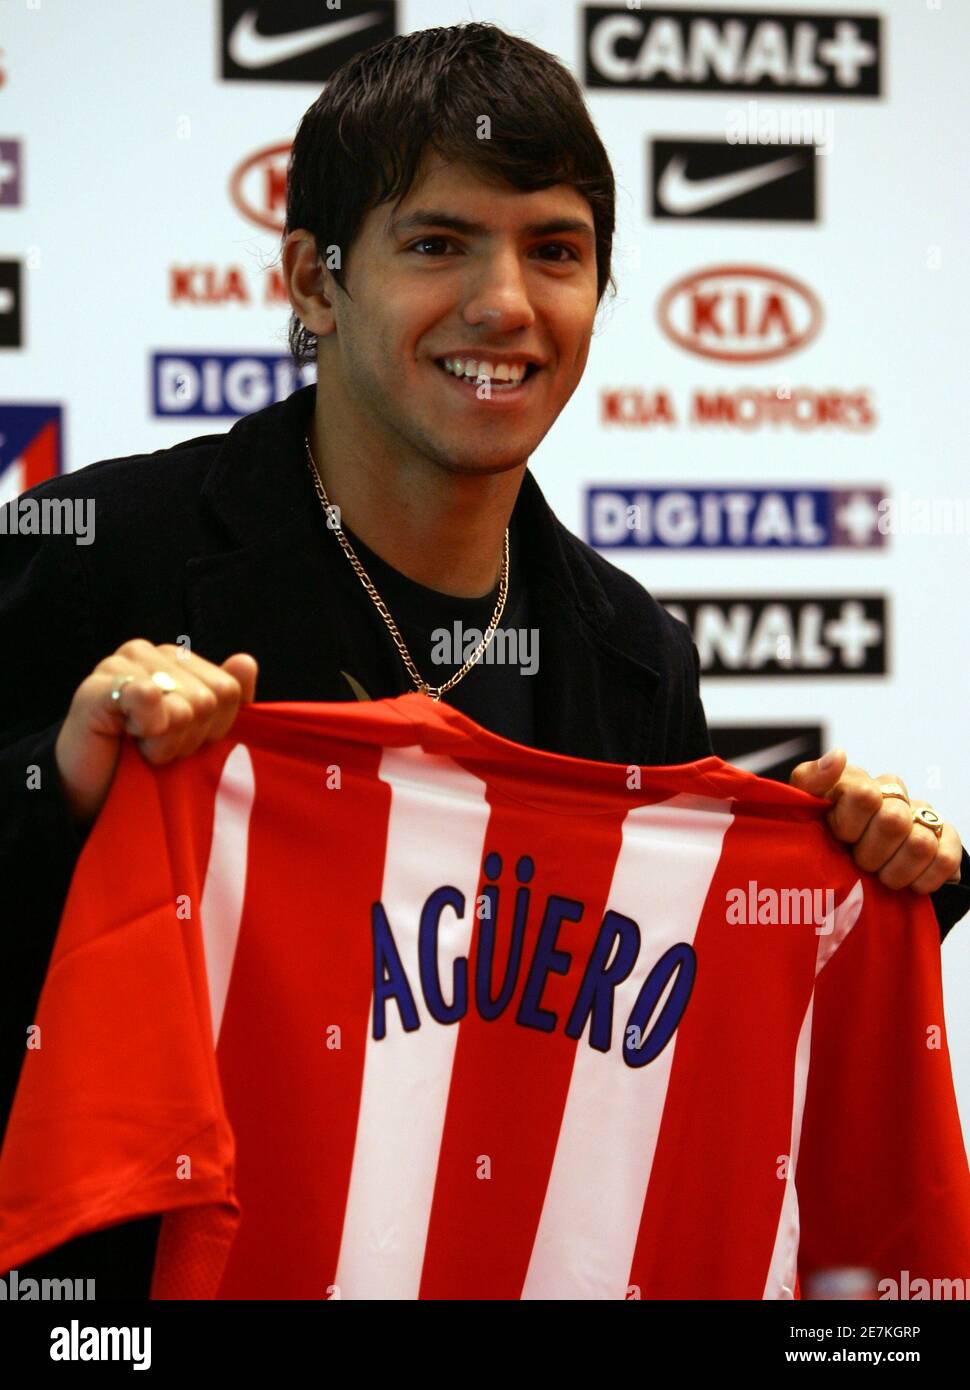 Atletico Madrid's new soccer player Sergio Aguero from Argentina holds his  new team jersey during his presentation ceremony at Vicente Calderon  stadium in Madrid June 5, 2006 after signing a six-year contract